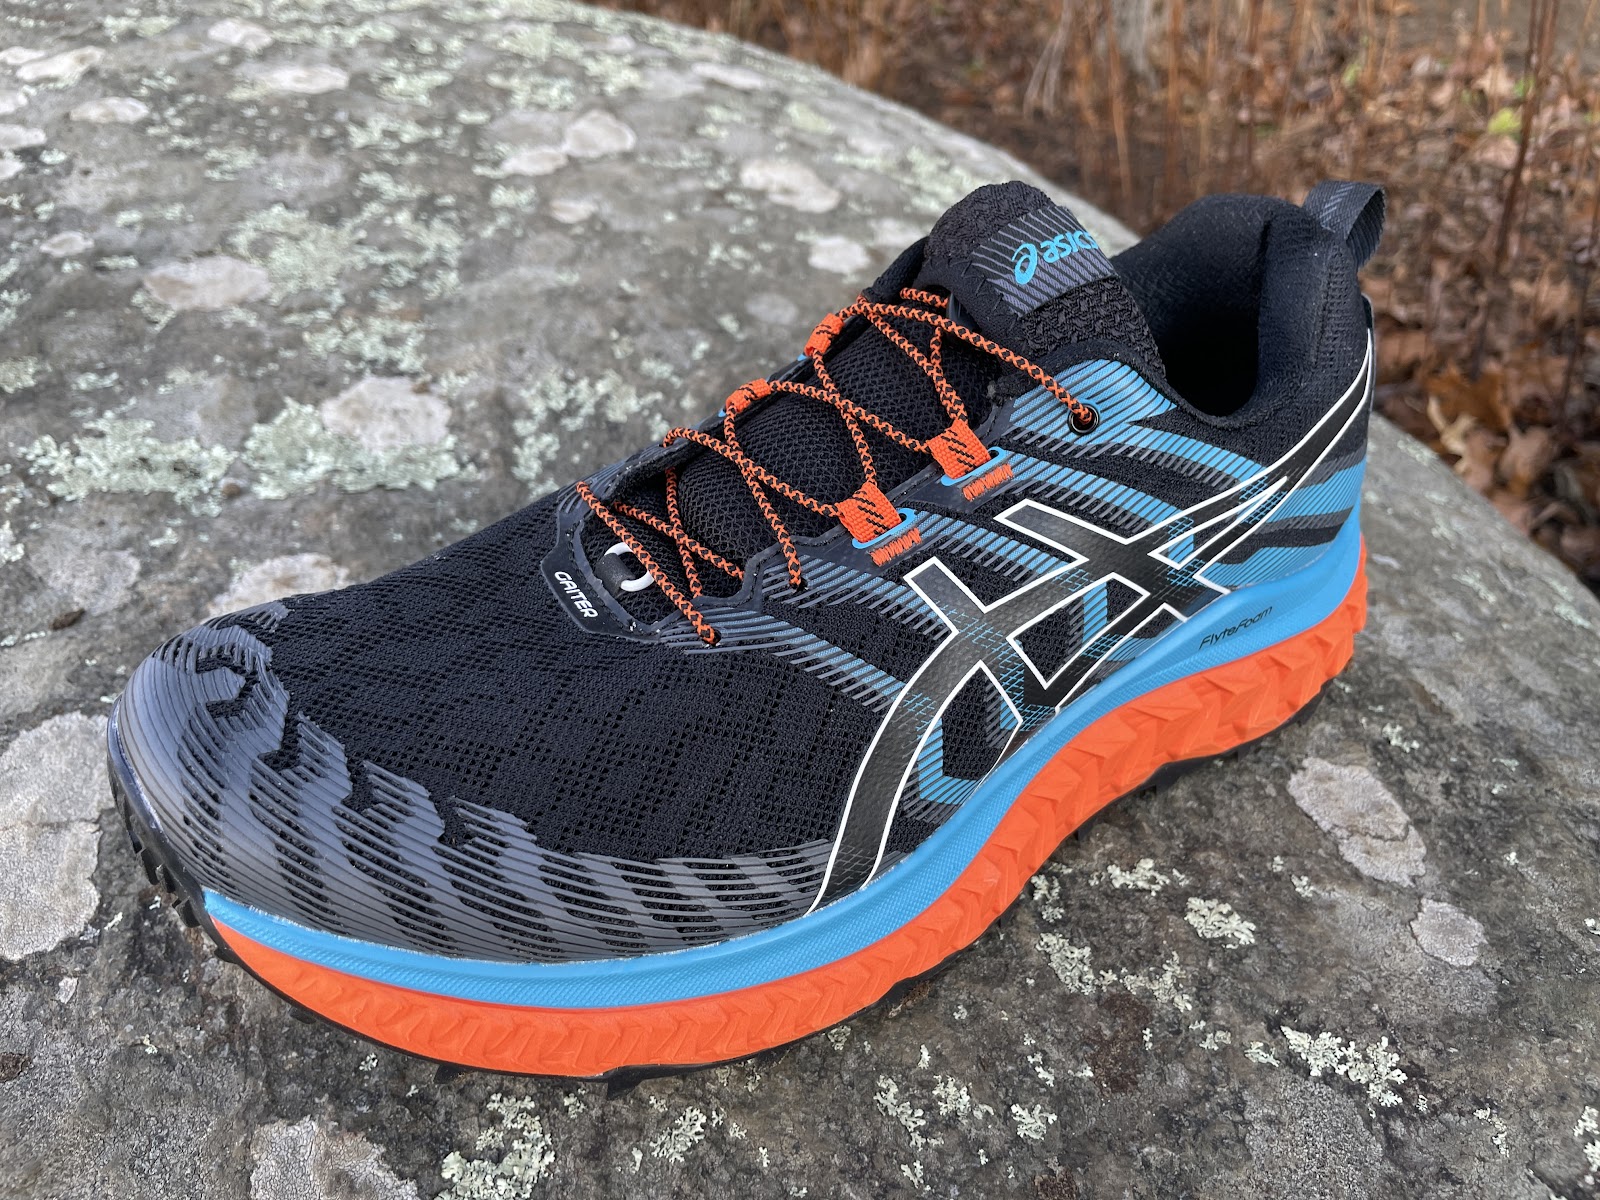 Road Trail Run: ASICS Trabuco Max Multi Review- Rock and Roll for Trails! Lively Ride, Big Cushion & Superb Protection